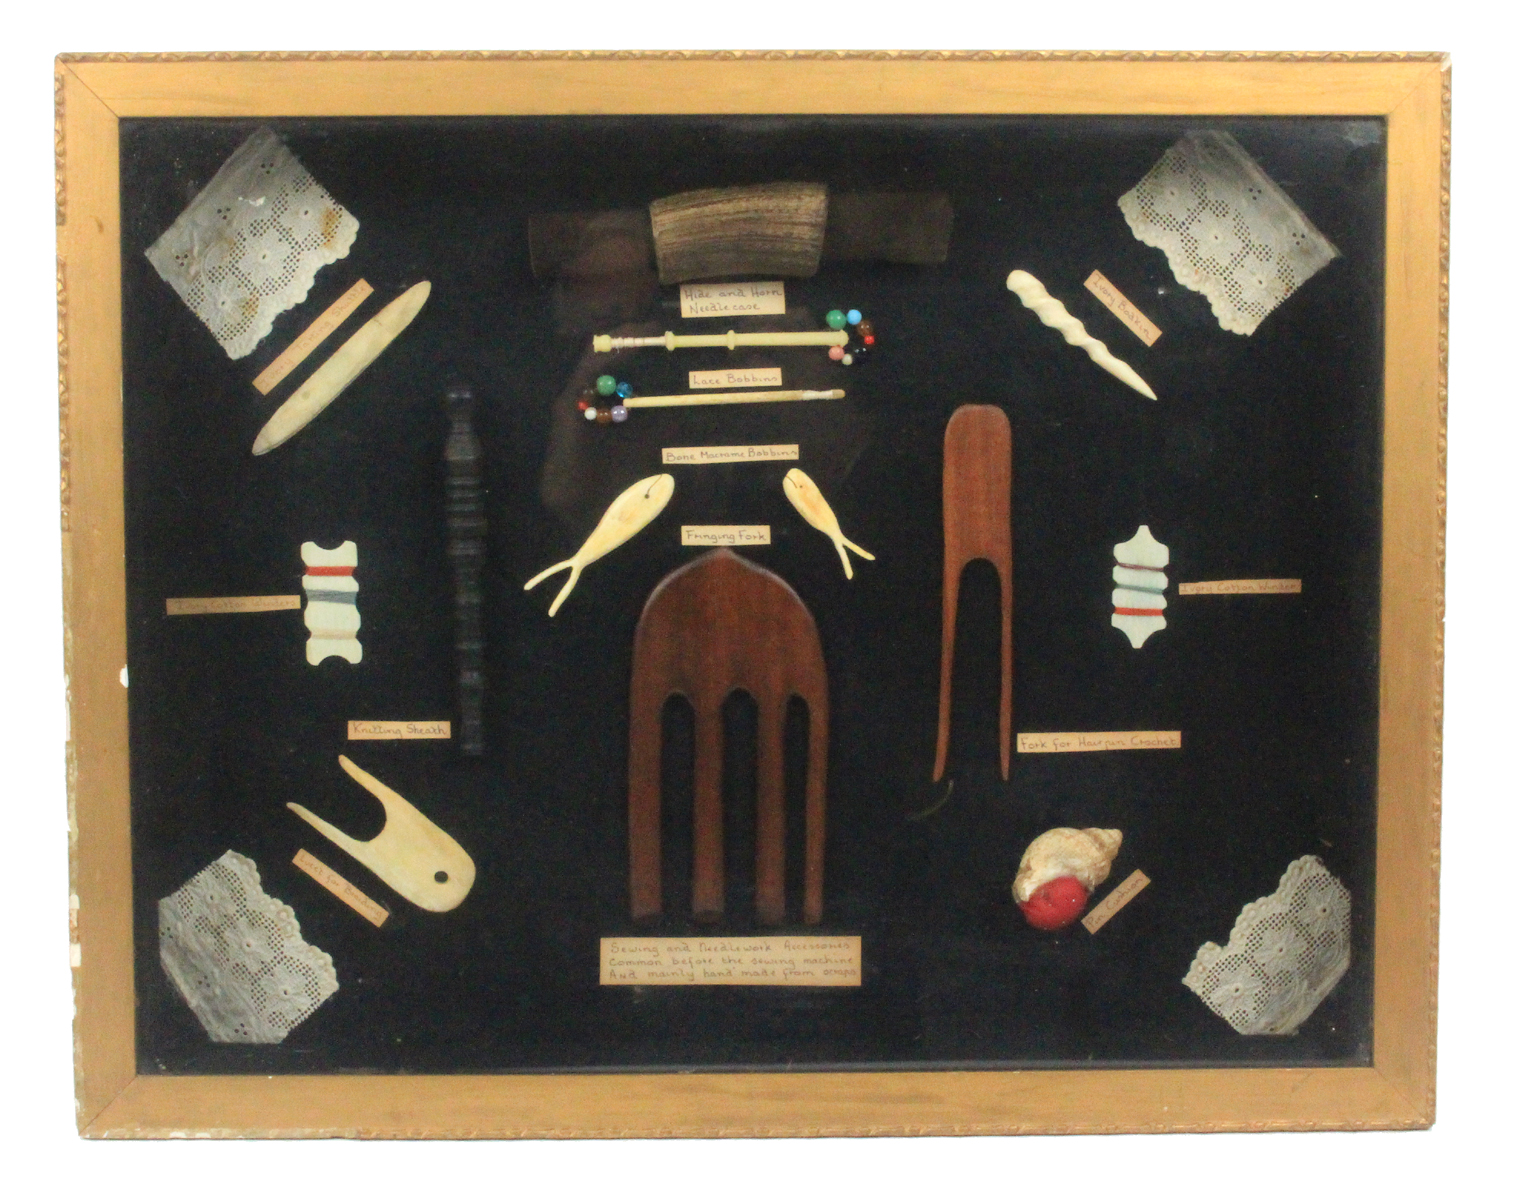 A mixed lot - sewing - comprising a framed display of sewing and other tools, titled 'Sewing and